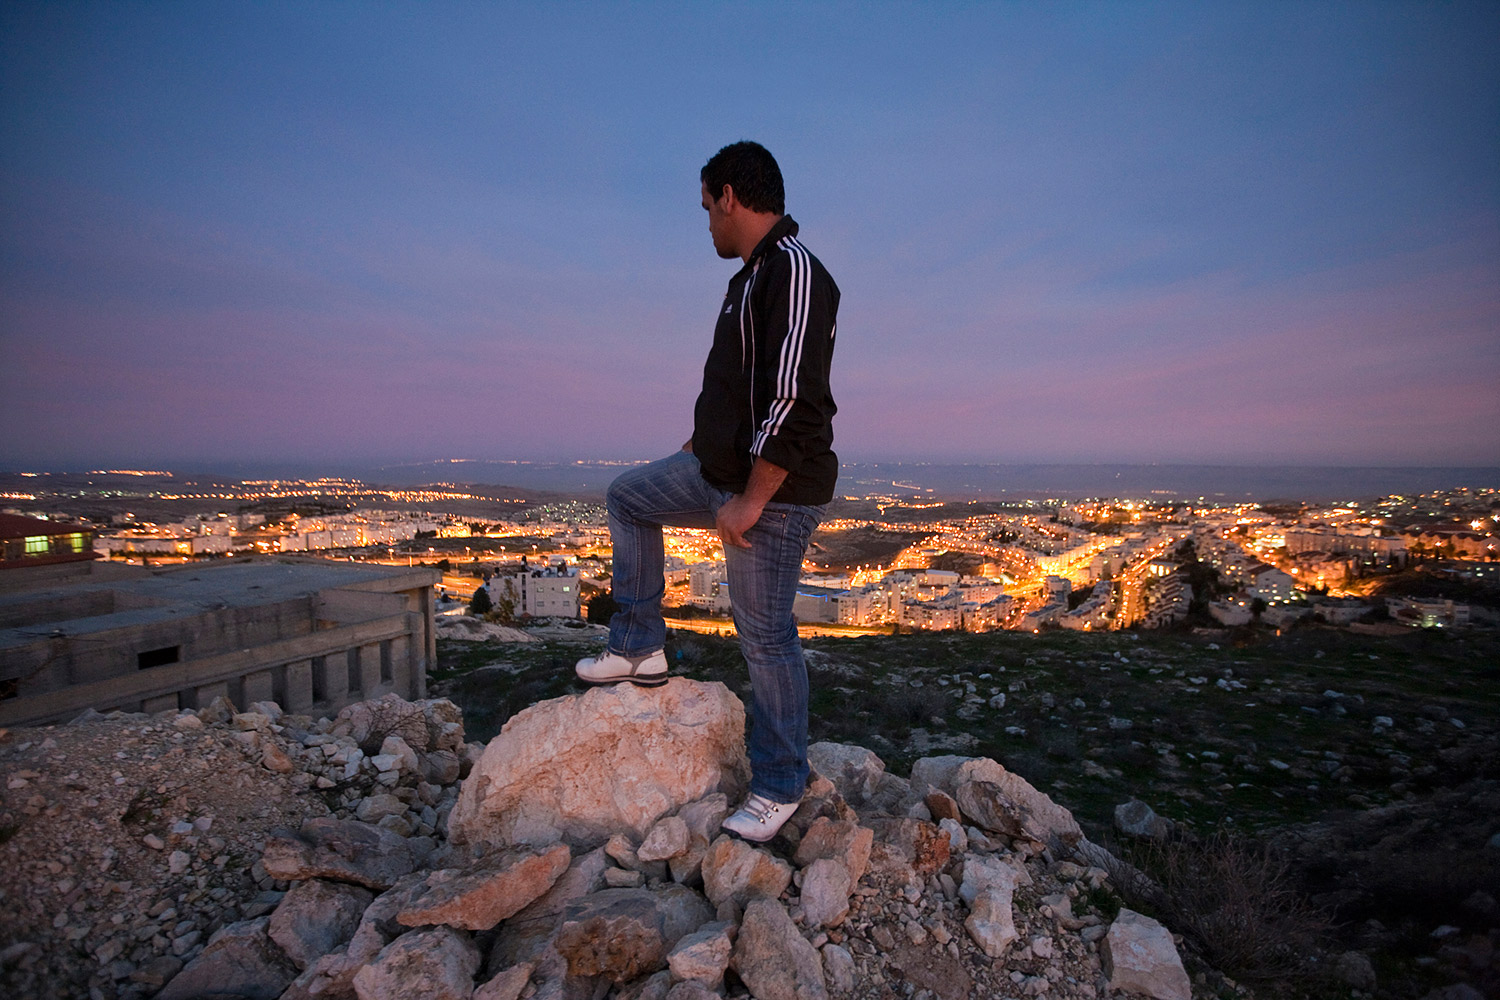 Samed Awad, 18, watching night fall over the Jewish neighborhood Givat Zeev from a hill next to his home in East Jerusalem. Samed says his family tries to have as little contact as possible with the Jewish residents since they want to avoid any unnecessary trouble.